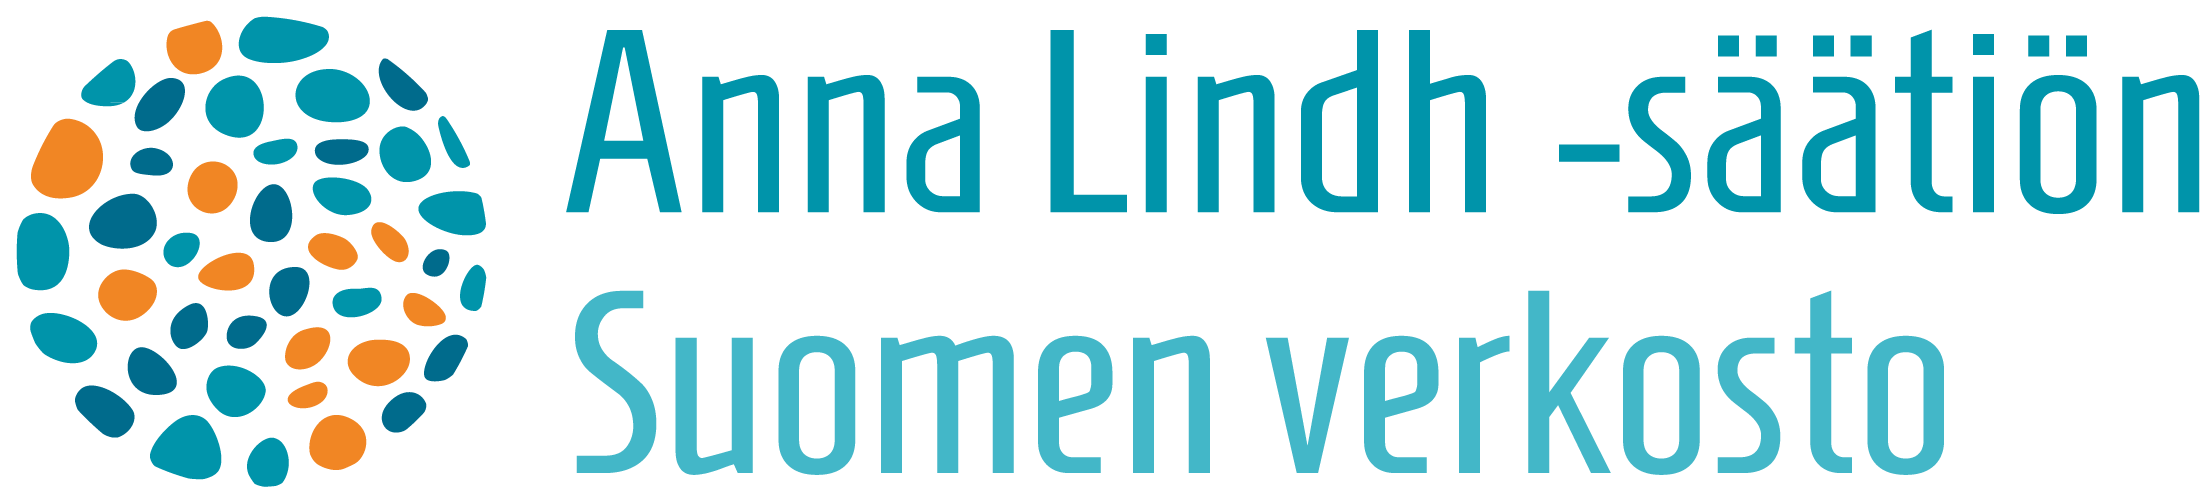 Anna Lind_Finland-RGB.png